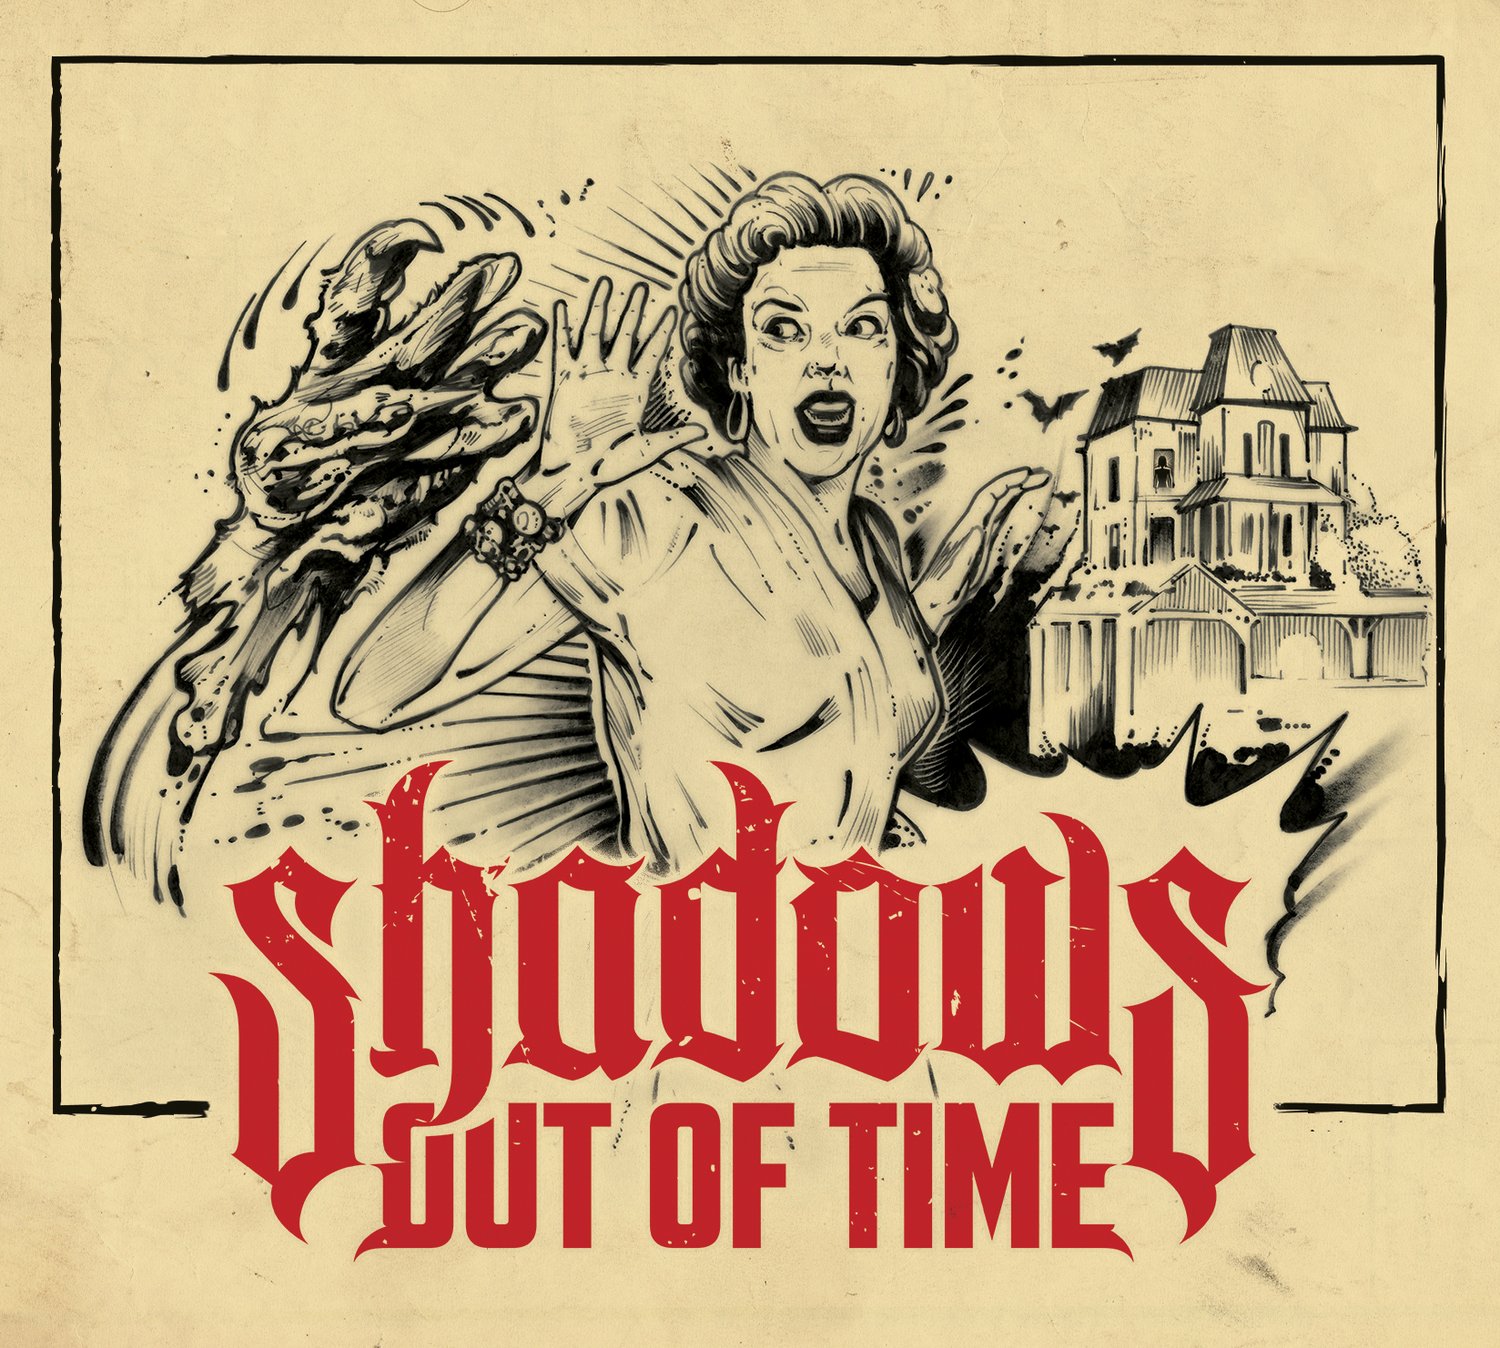 Shadows Out of Time - "Shadows Out of Time" (digipack, 2019)